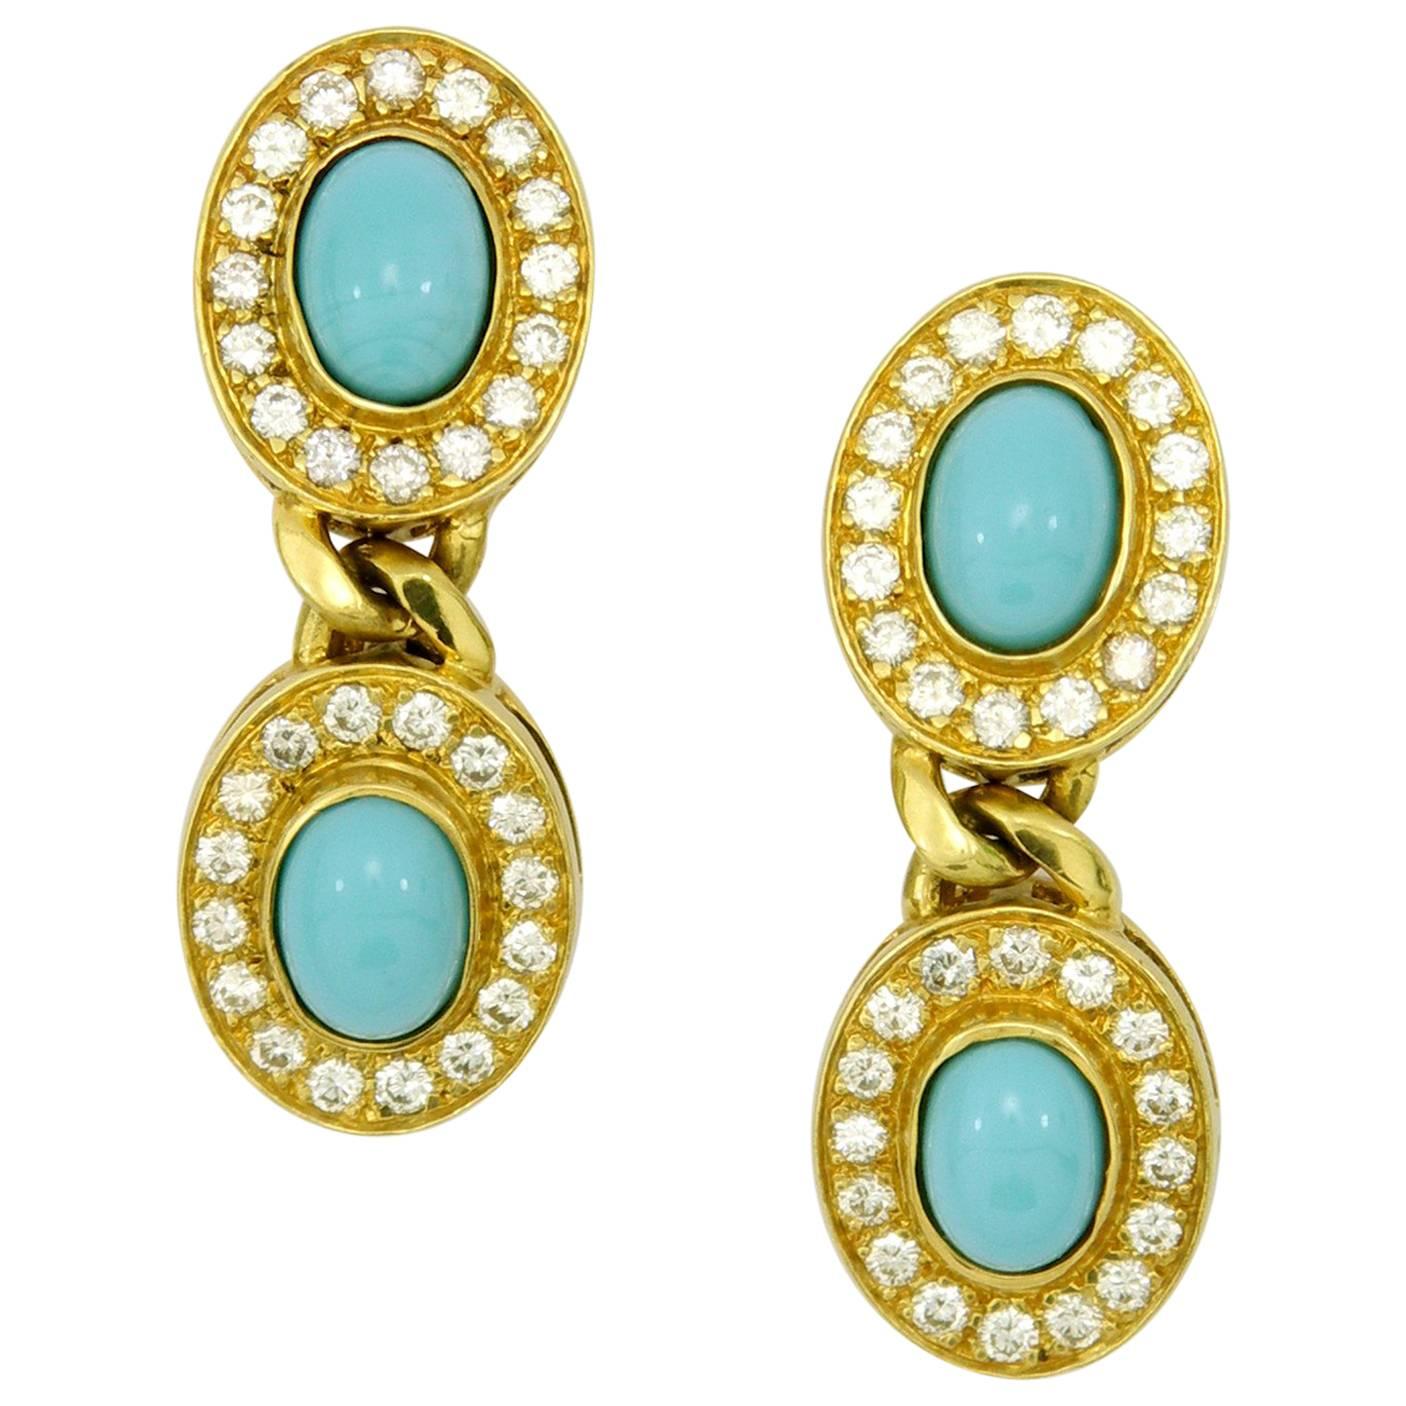 Hanging Gold Earrings with Diamonds